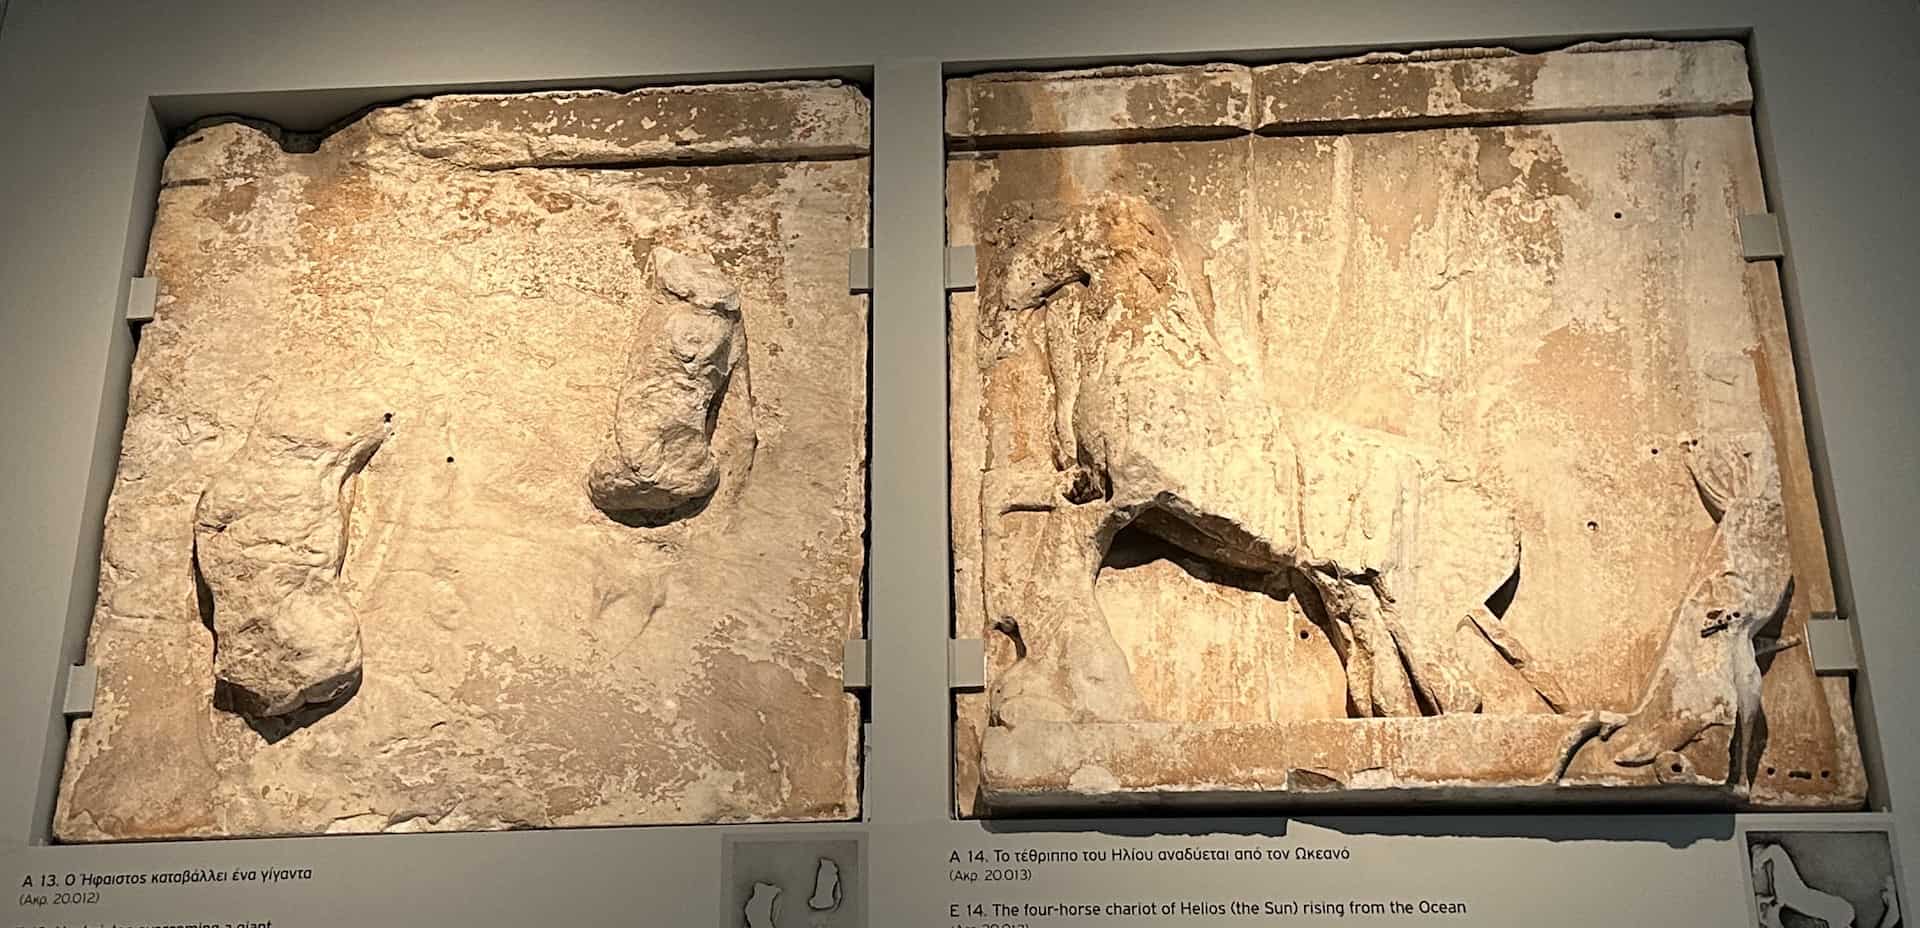 E 13 and E 14 on the east metopes of the Parthenon